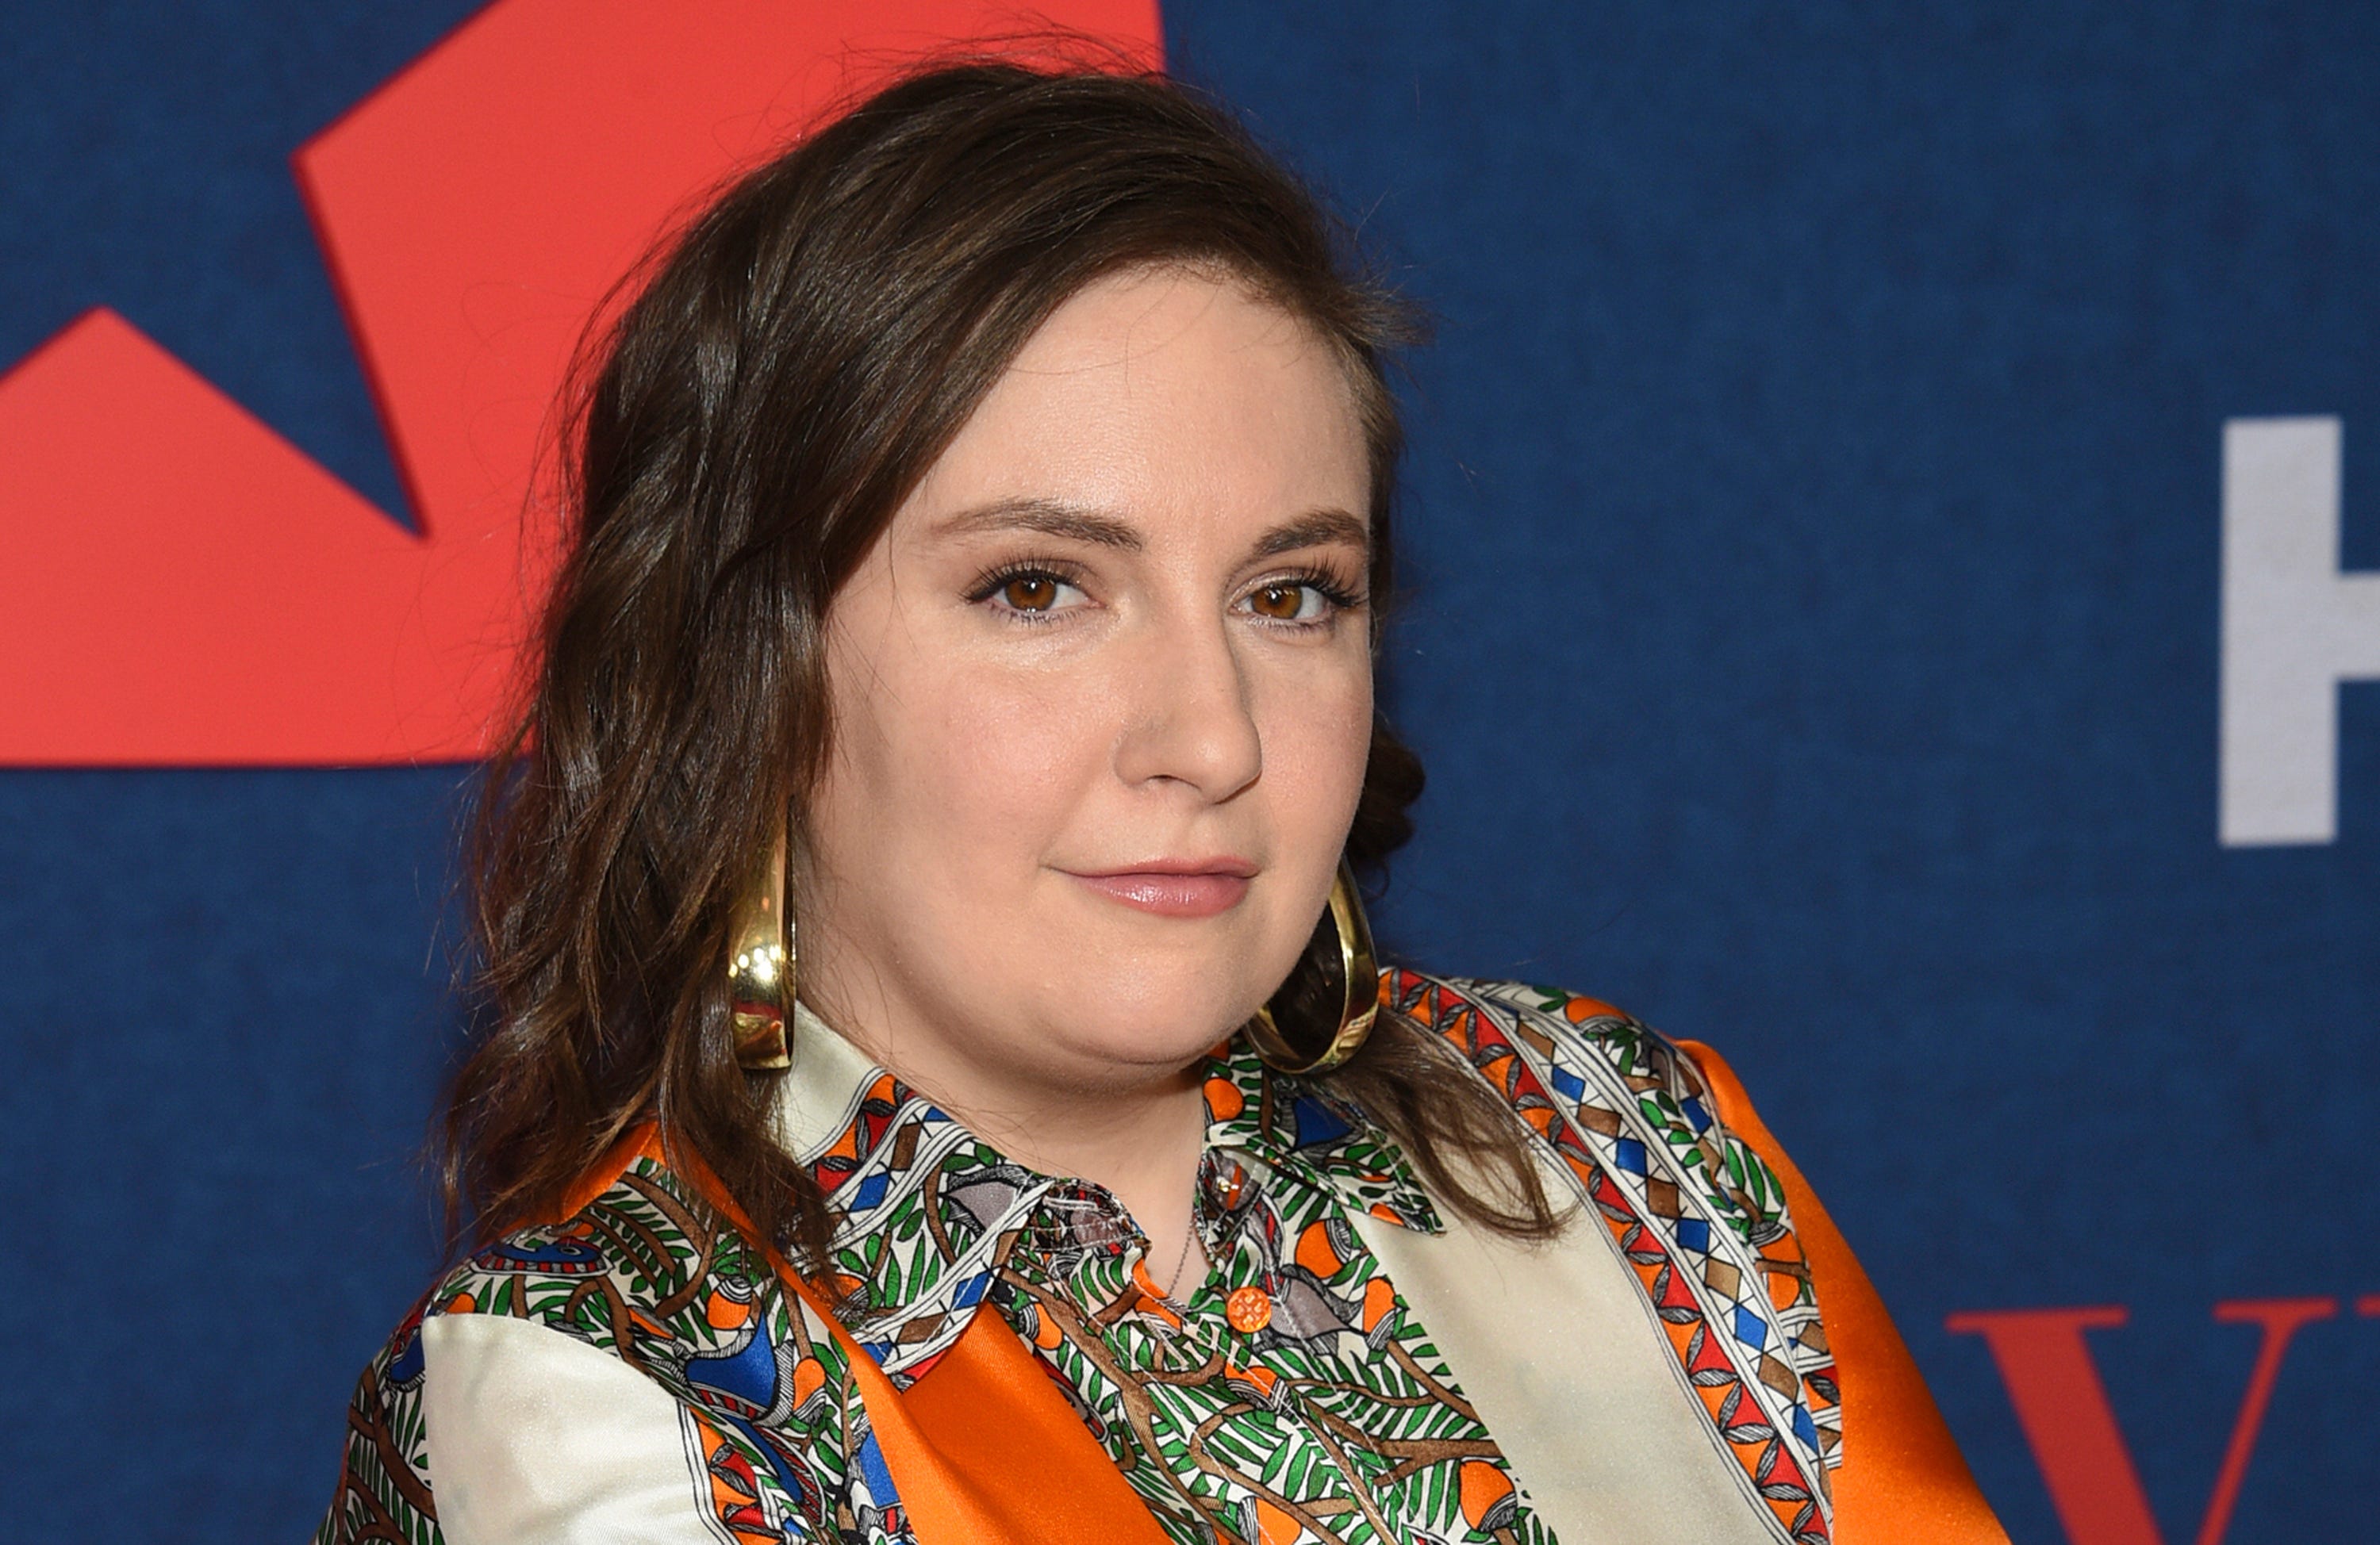 Lena Dunham Says Her Body Revolted Under Covid 19